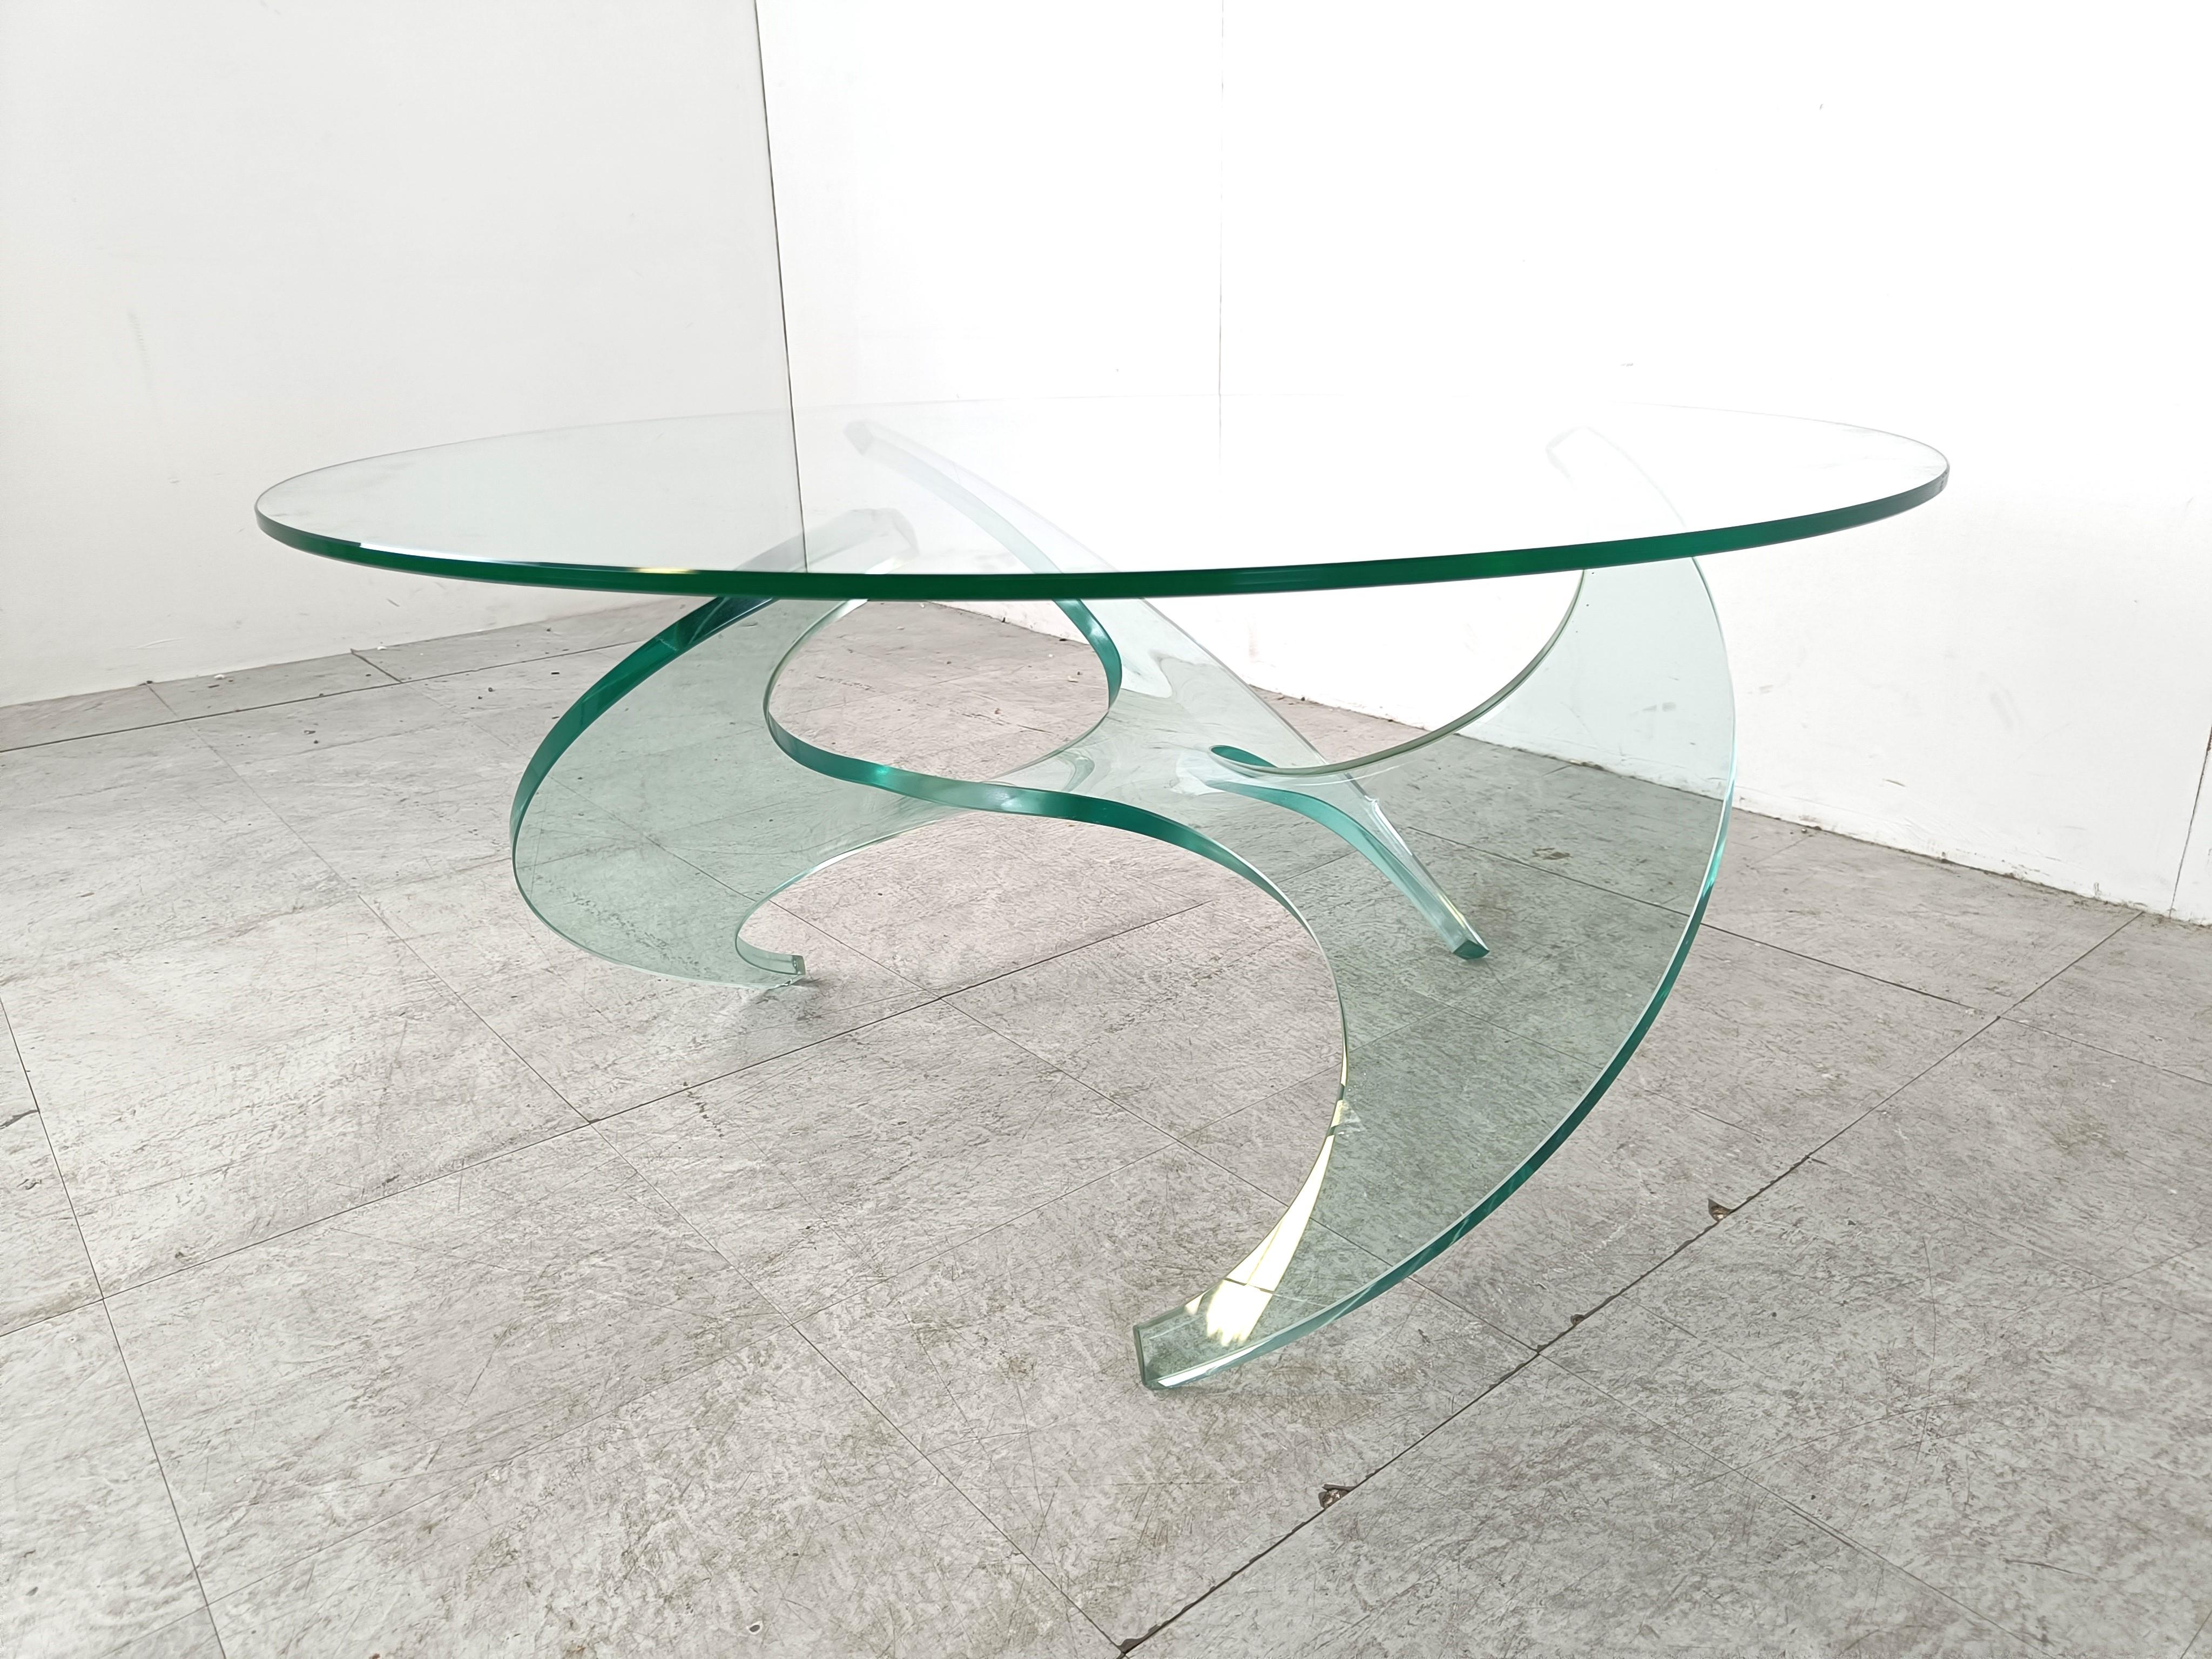 Vintage sculptural 'propellor' coffee table made entirely out of glass.

Very eye catching and timeless coffee table in the same manner as the metal propellor coffee tables from Knut Hesterberg.

We never saw a glass version before so we think it's